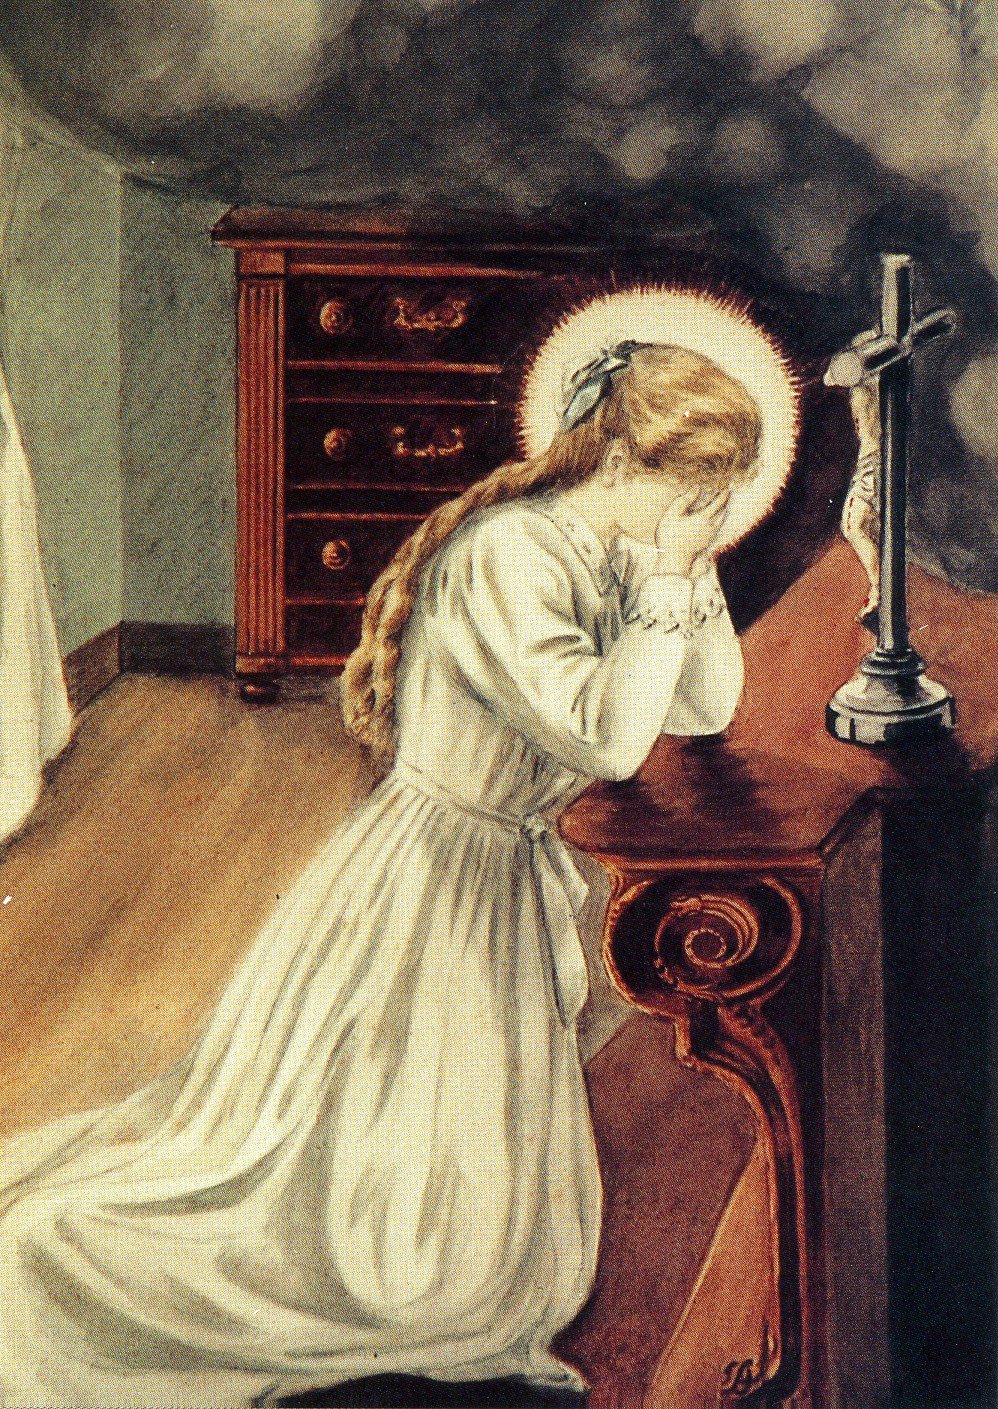 Painting of St. Therese suffering from "scruples."